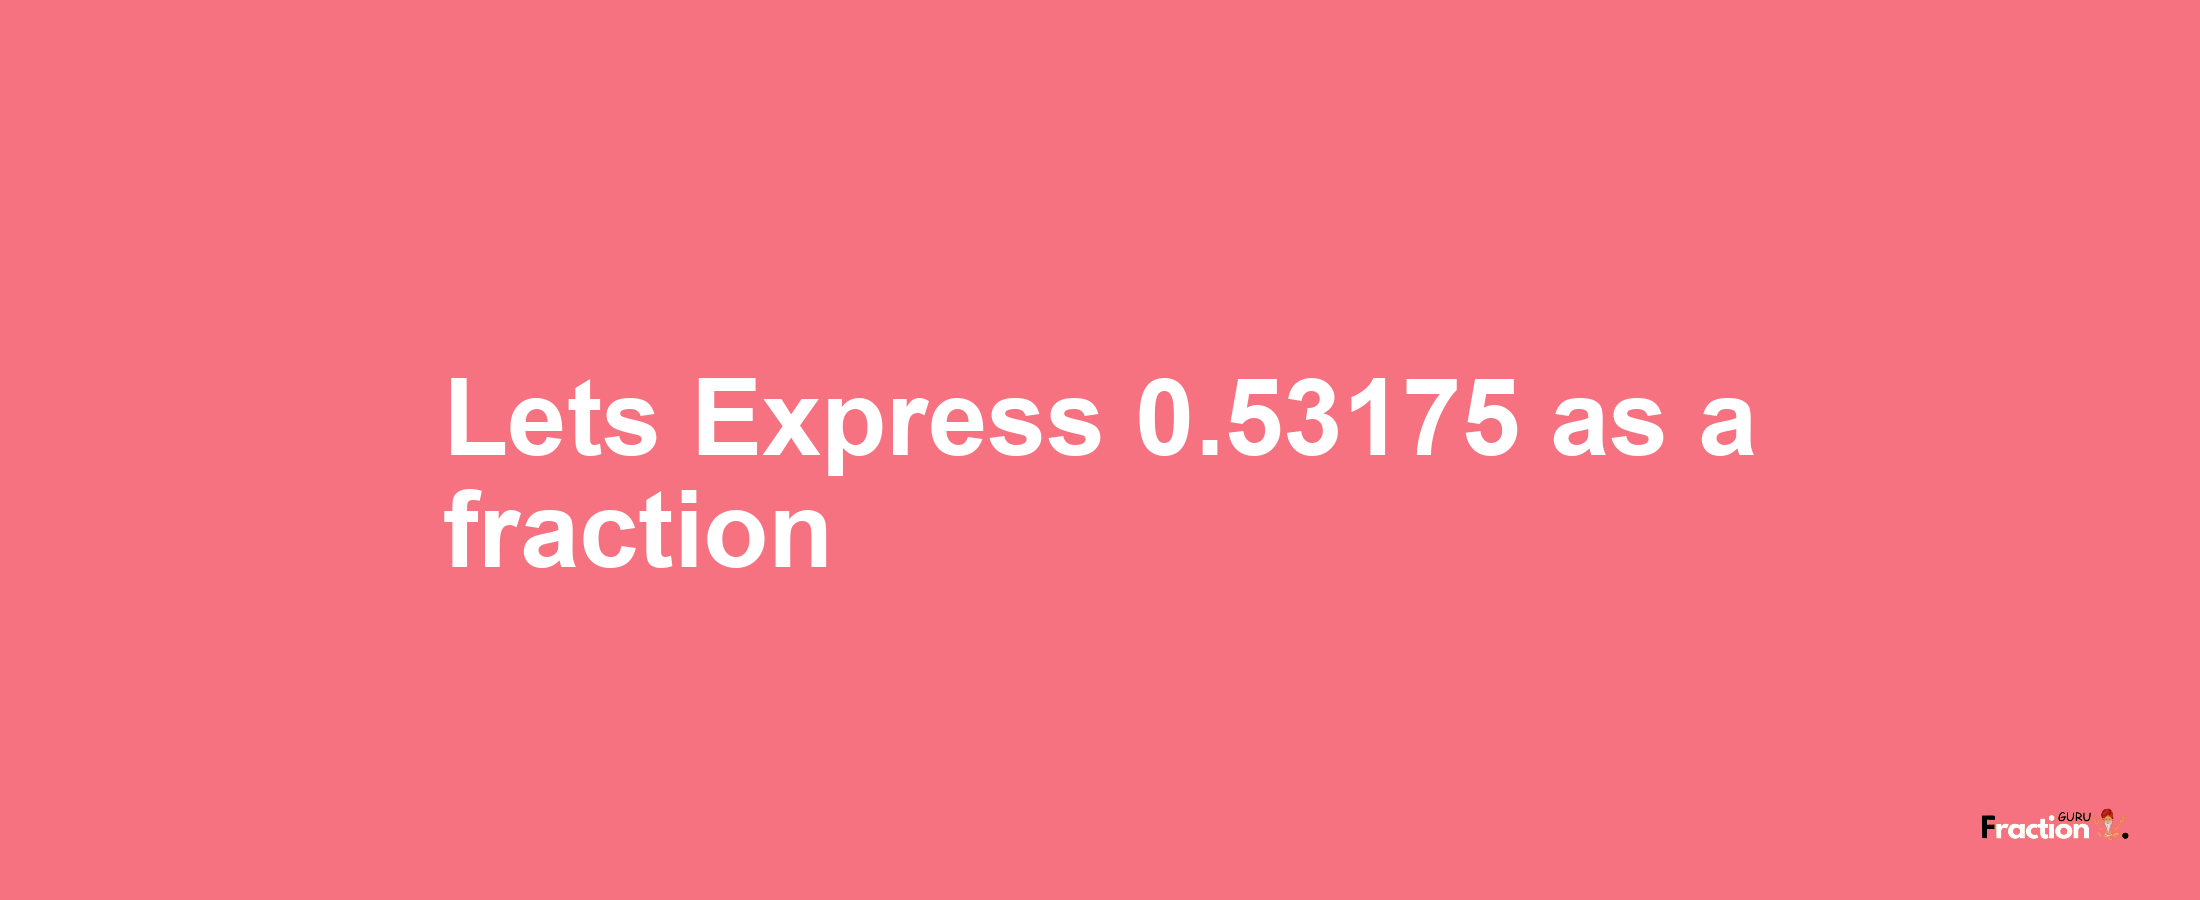 Lets Express 0.53175 as afraction